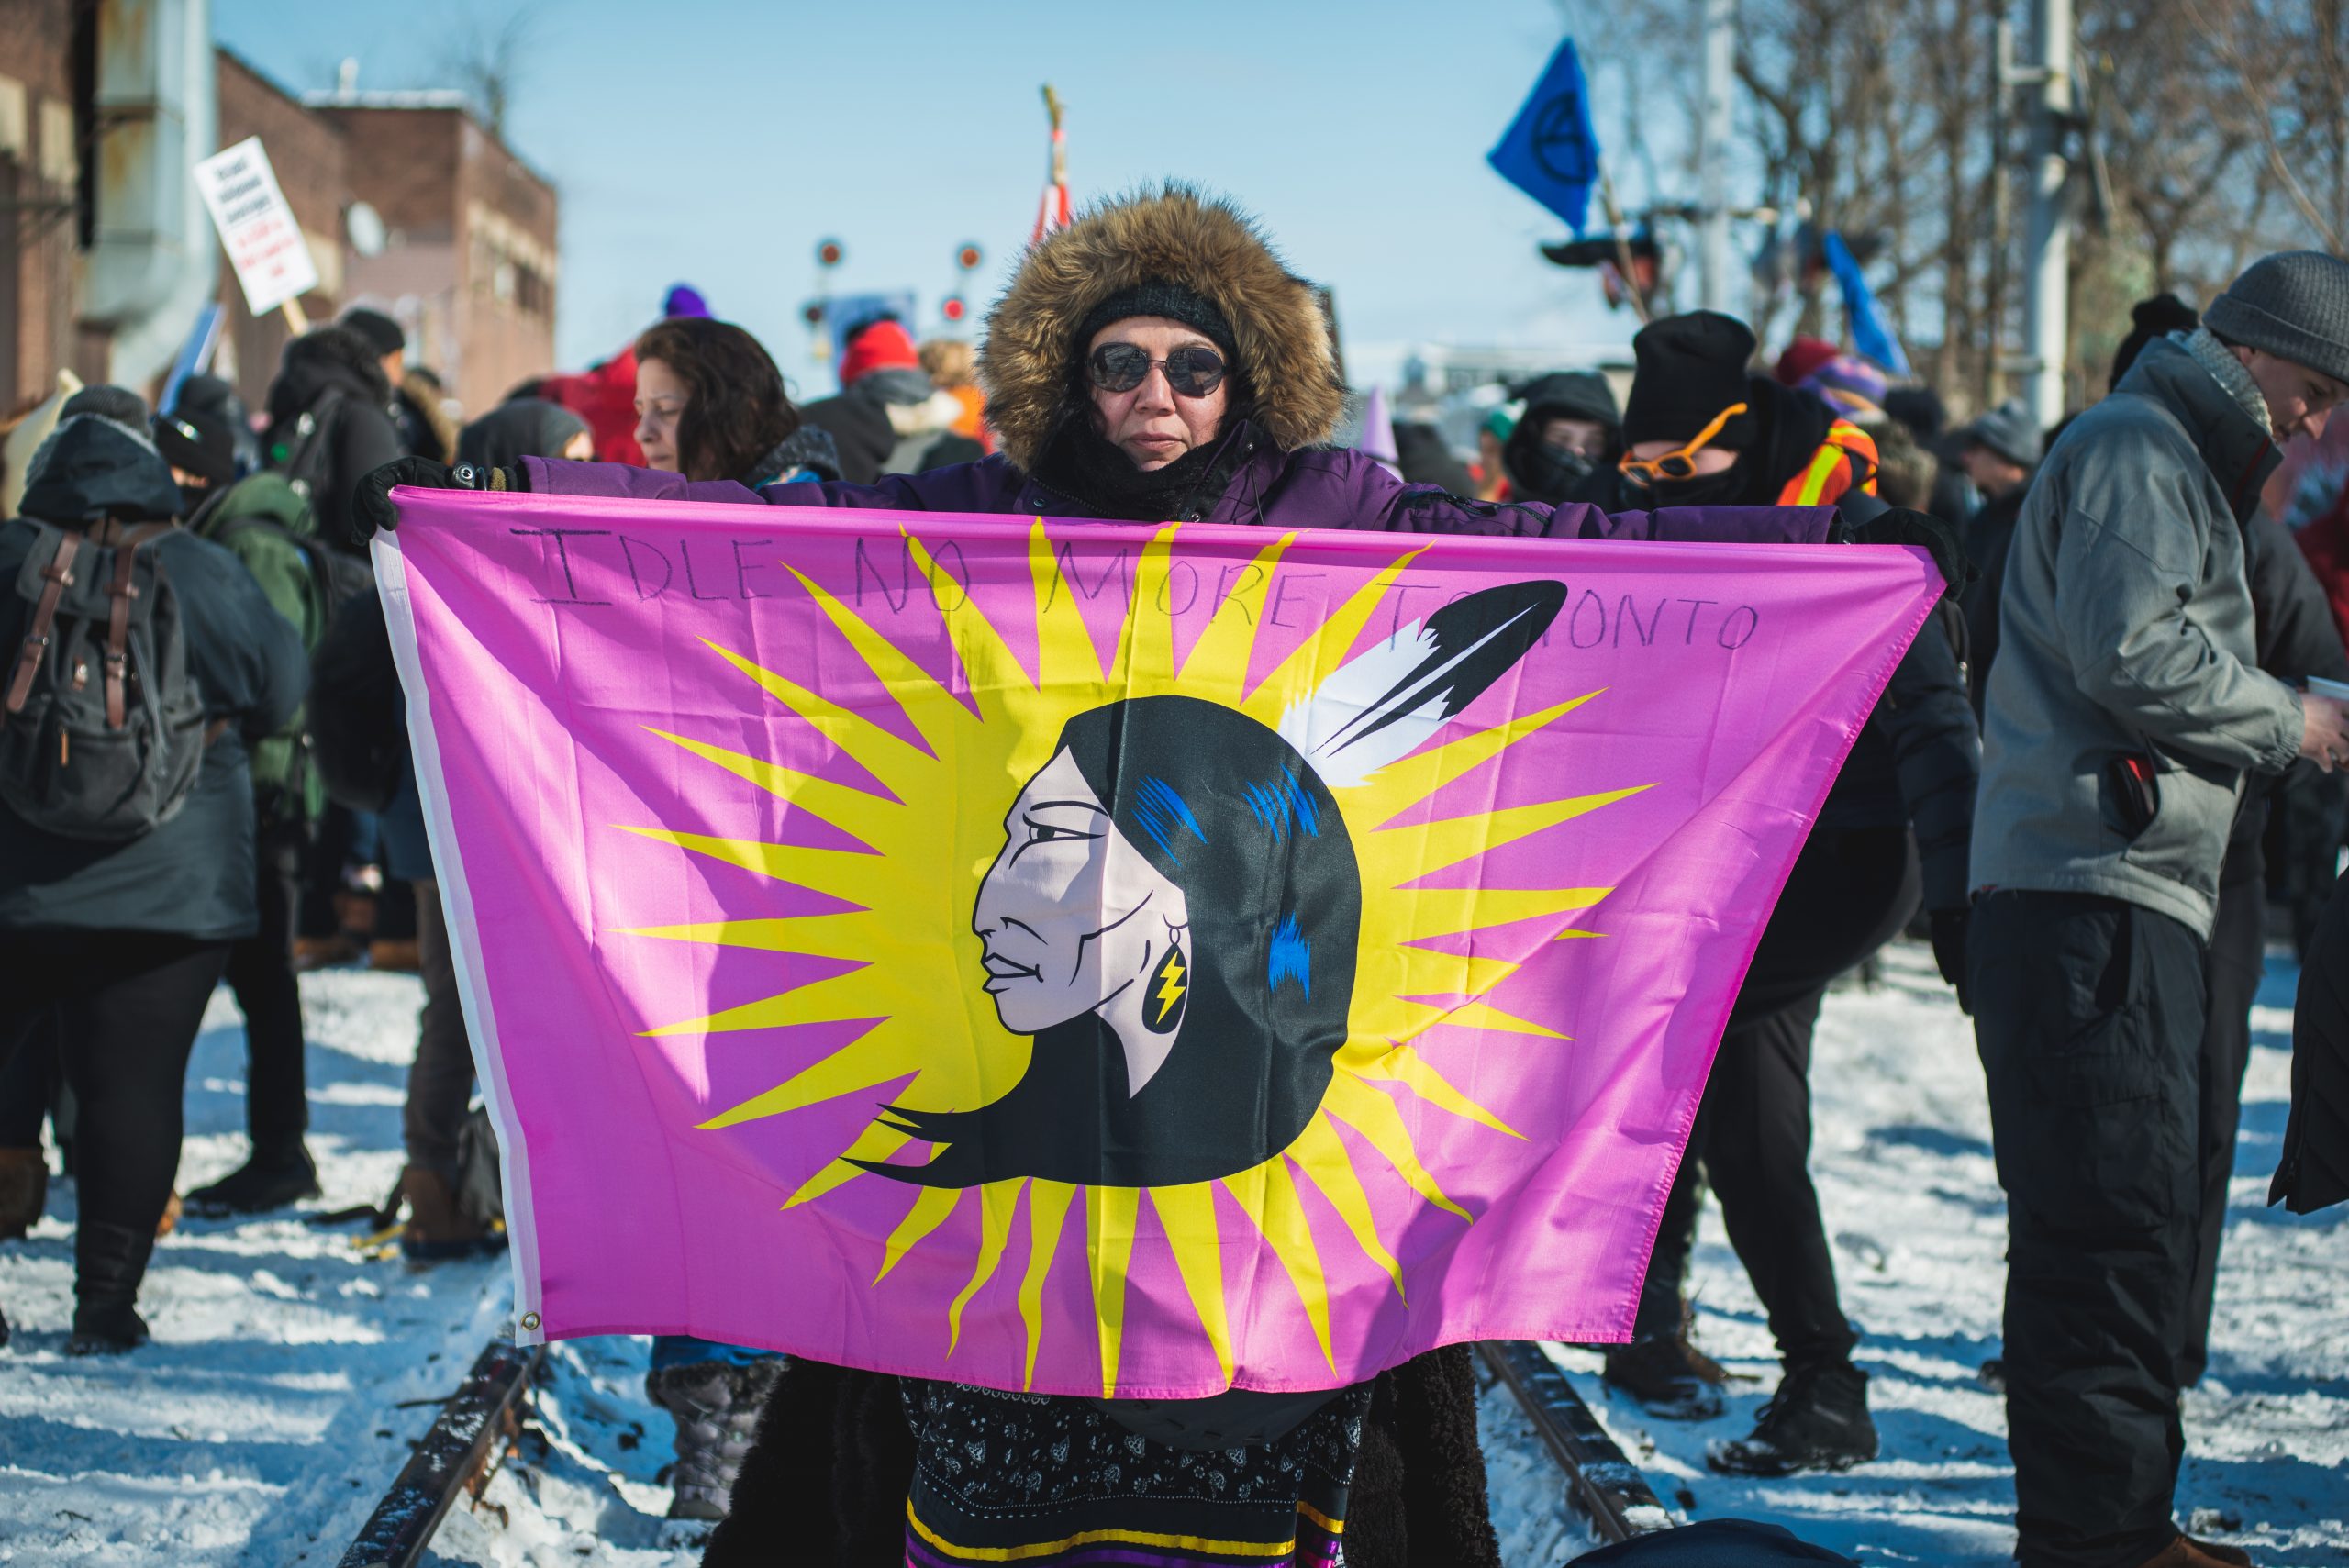 A woman stands in the middle of railroad tracks and holds up a pink flag showing an Indigenous woman wearing a feather in her hair and a lightning bolt earring. The words "Idle No More Toronto" are written in marker across the top of the flag.